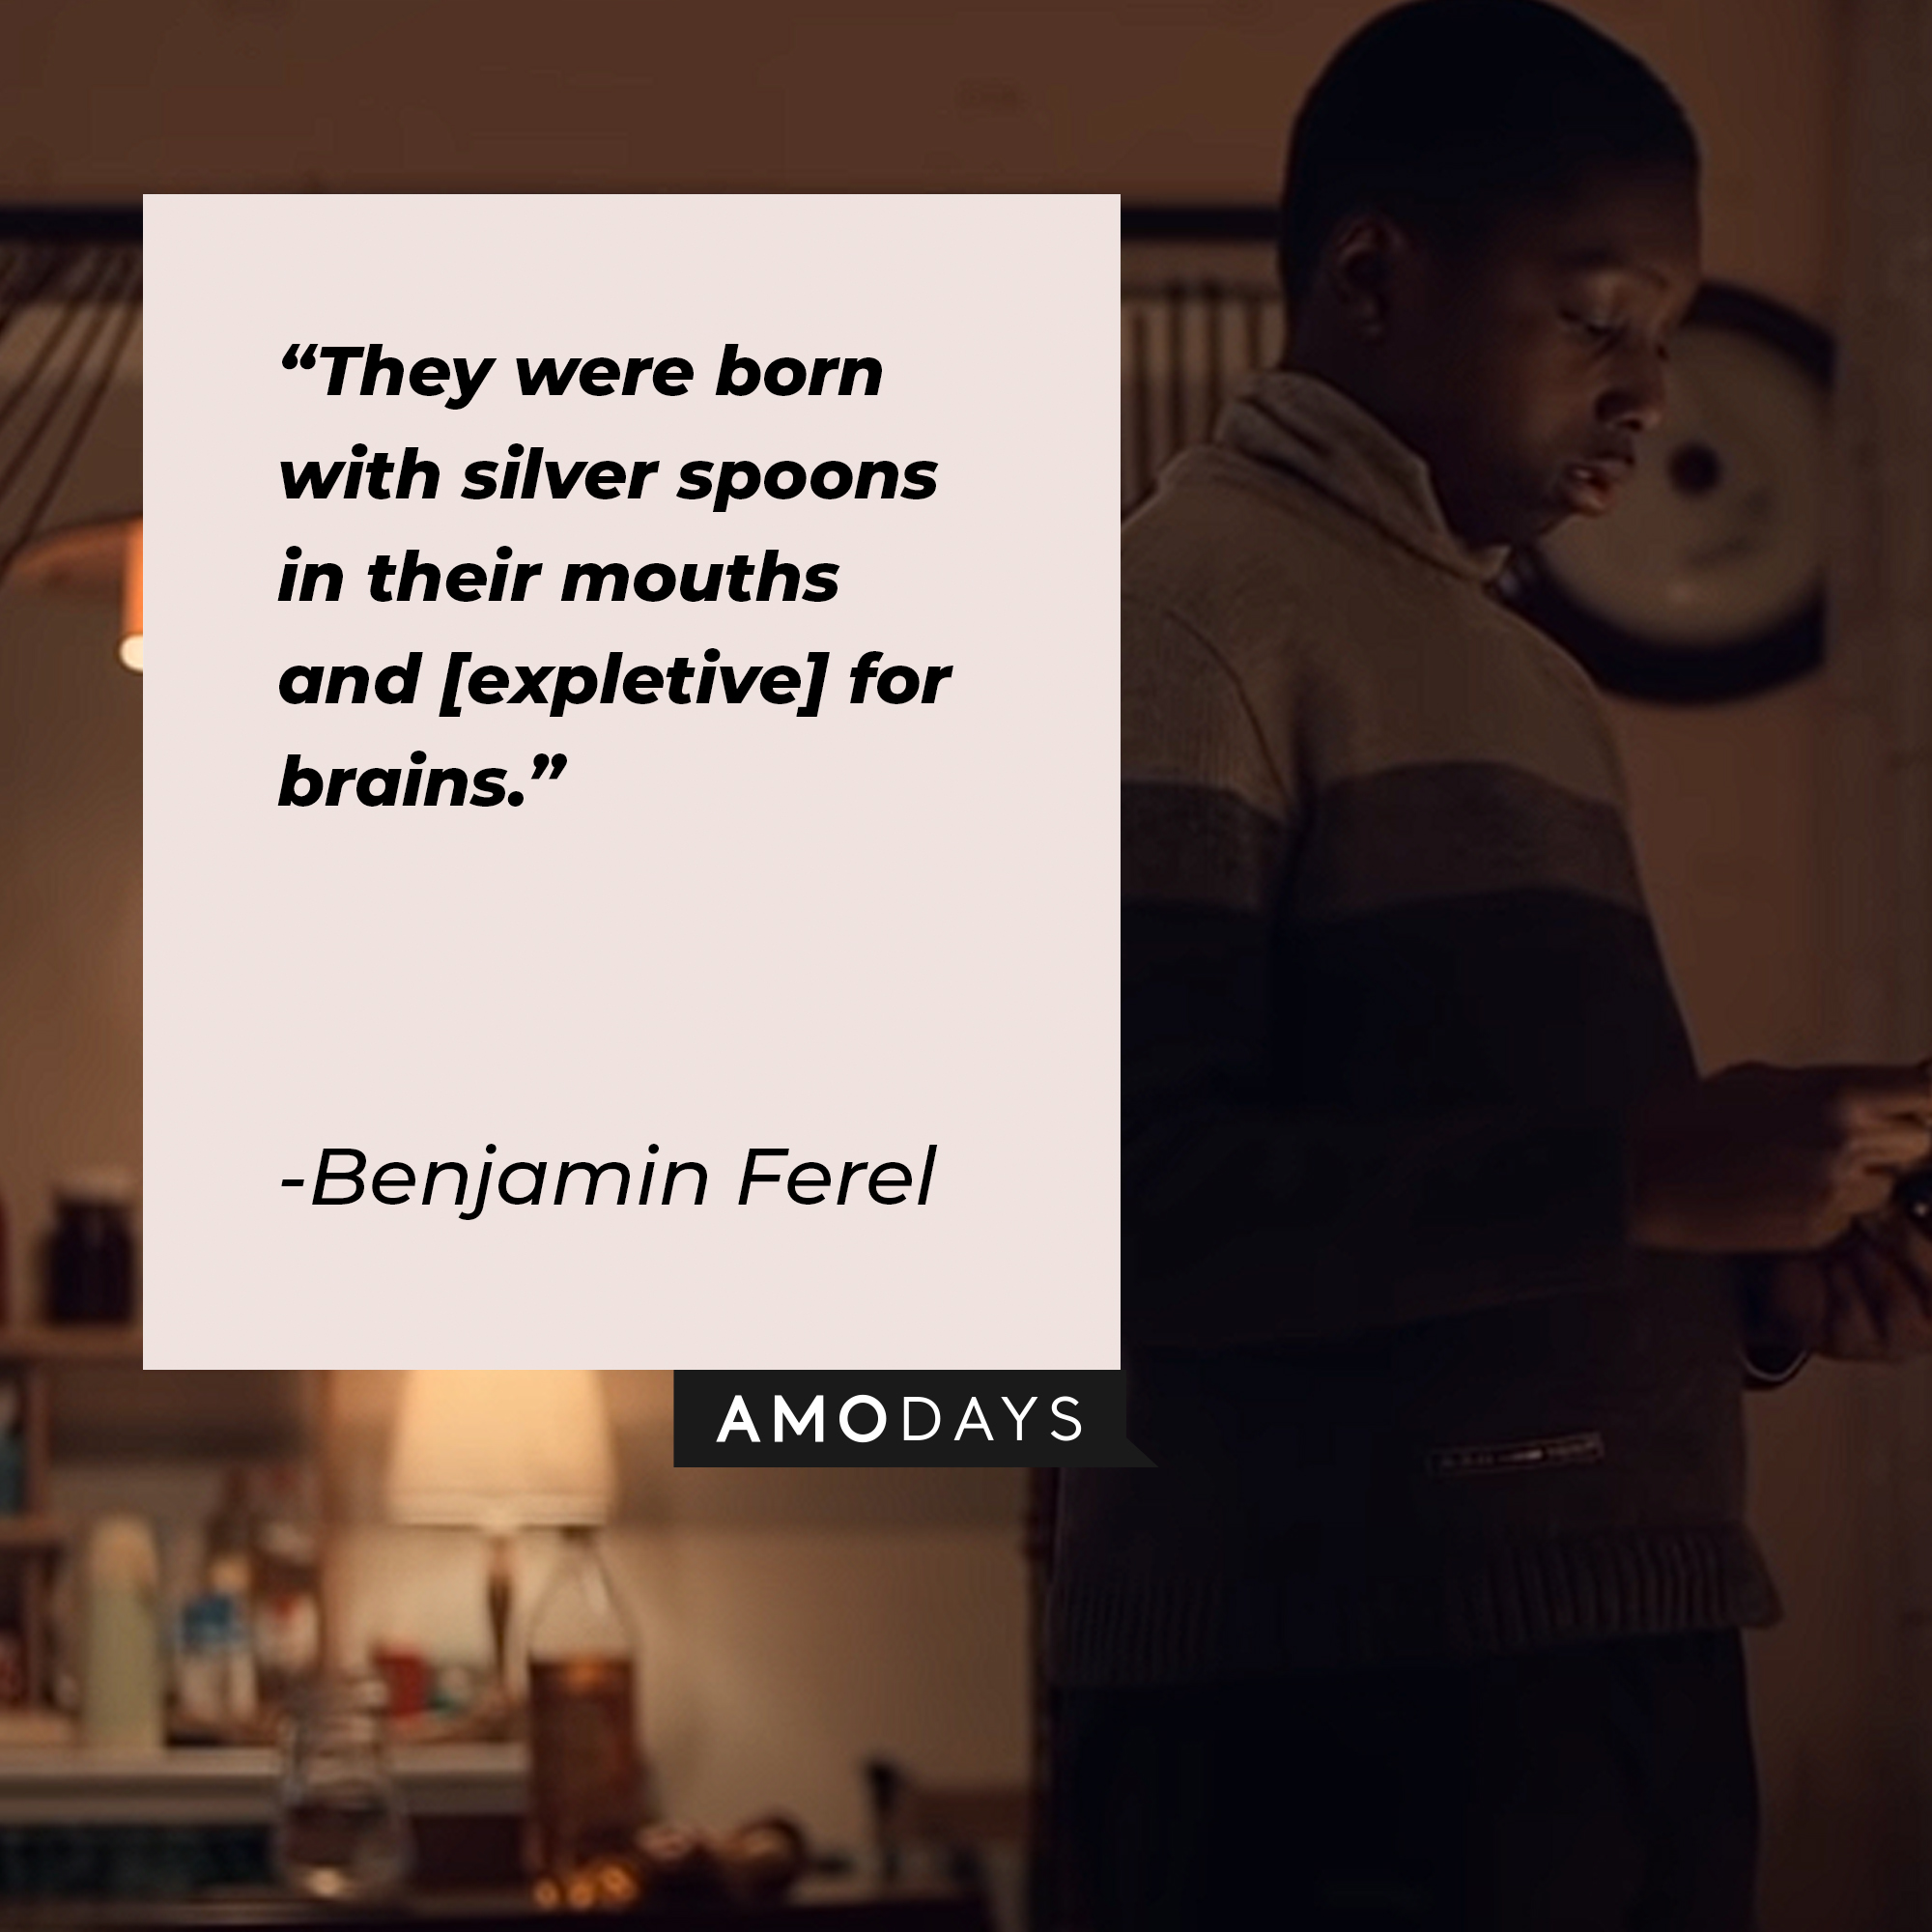 Benjamin Ferel's quote: "They were born with silver spoons in their mouths and [expletive] for brains." | Image: Amodays